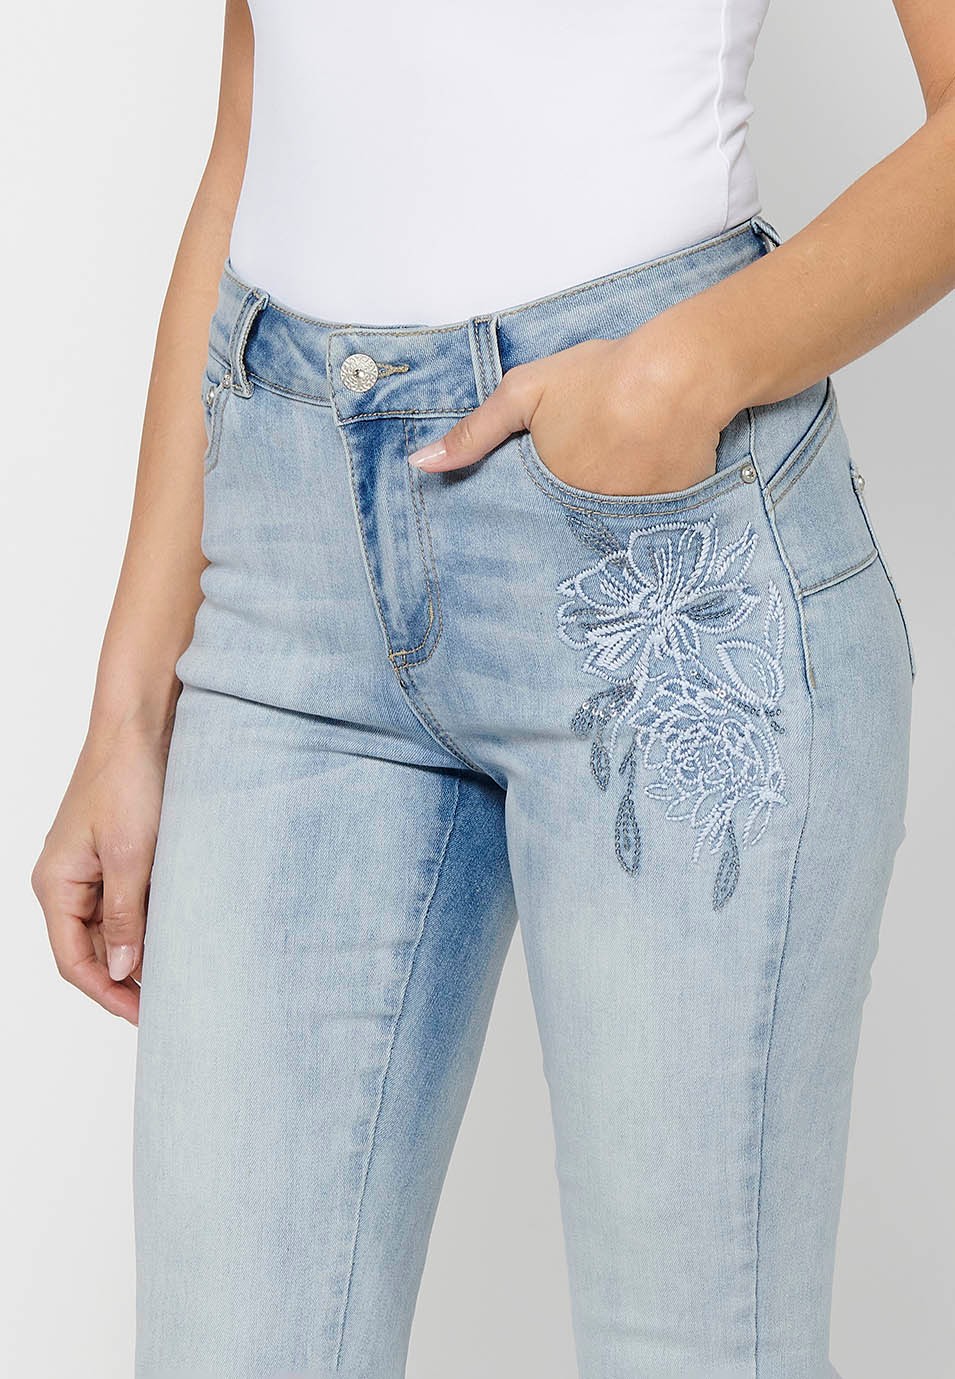 Slim long pants with front zipper and button closure with embroidered details in Light Blue for Women 8